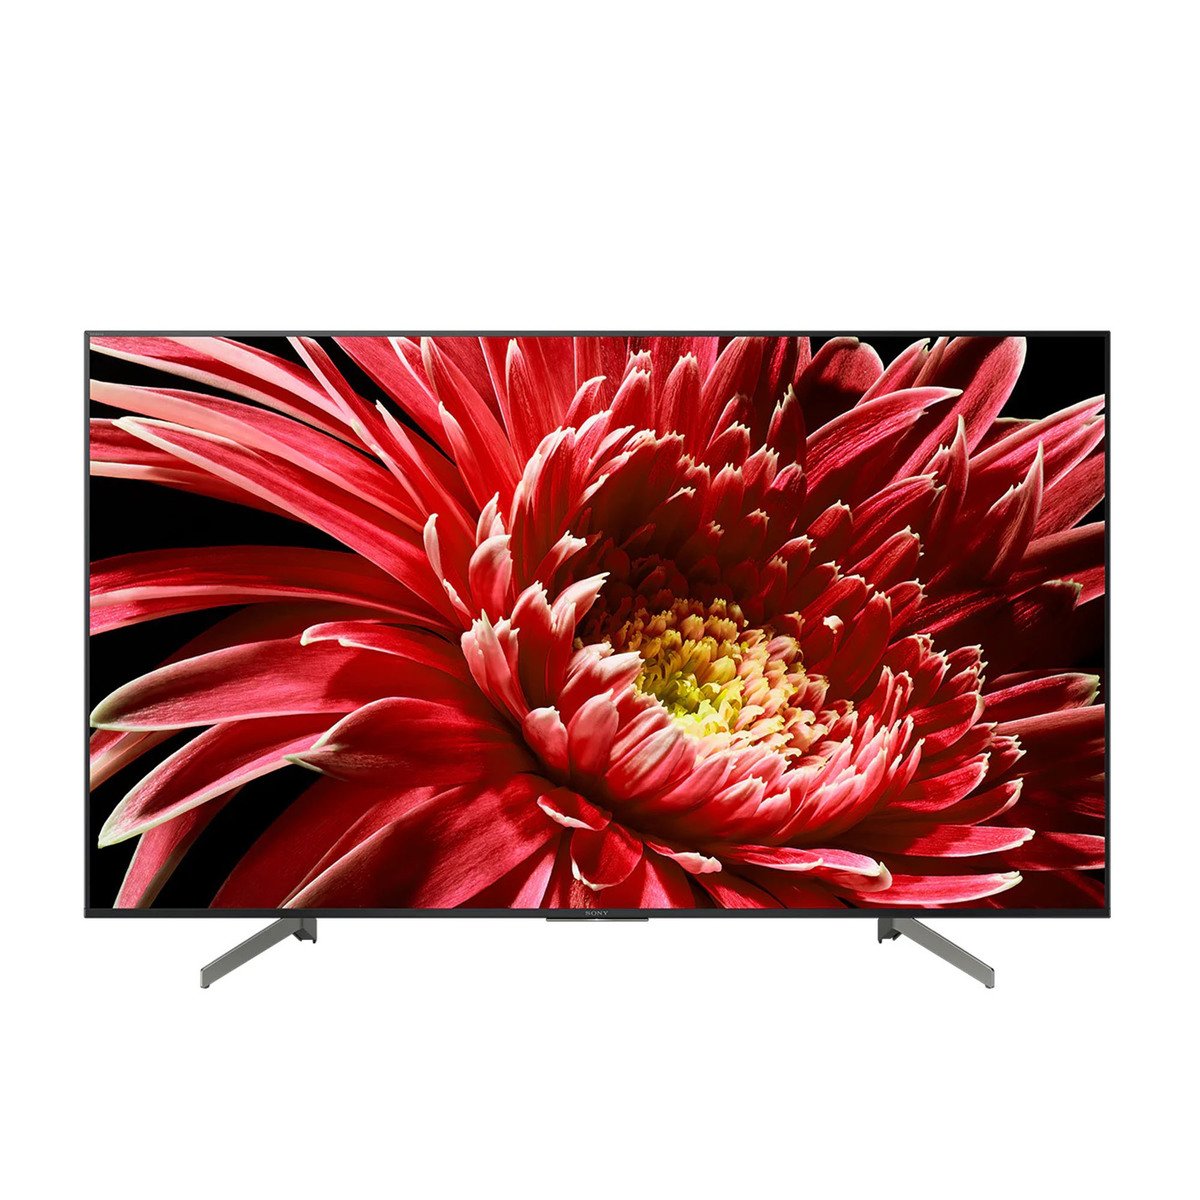 Sony 4K Ultra HD Android Smart LED TV KD55X8500G 55"